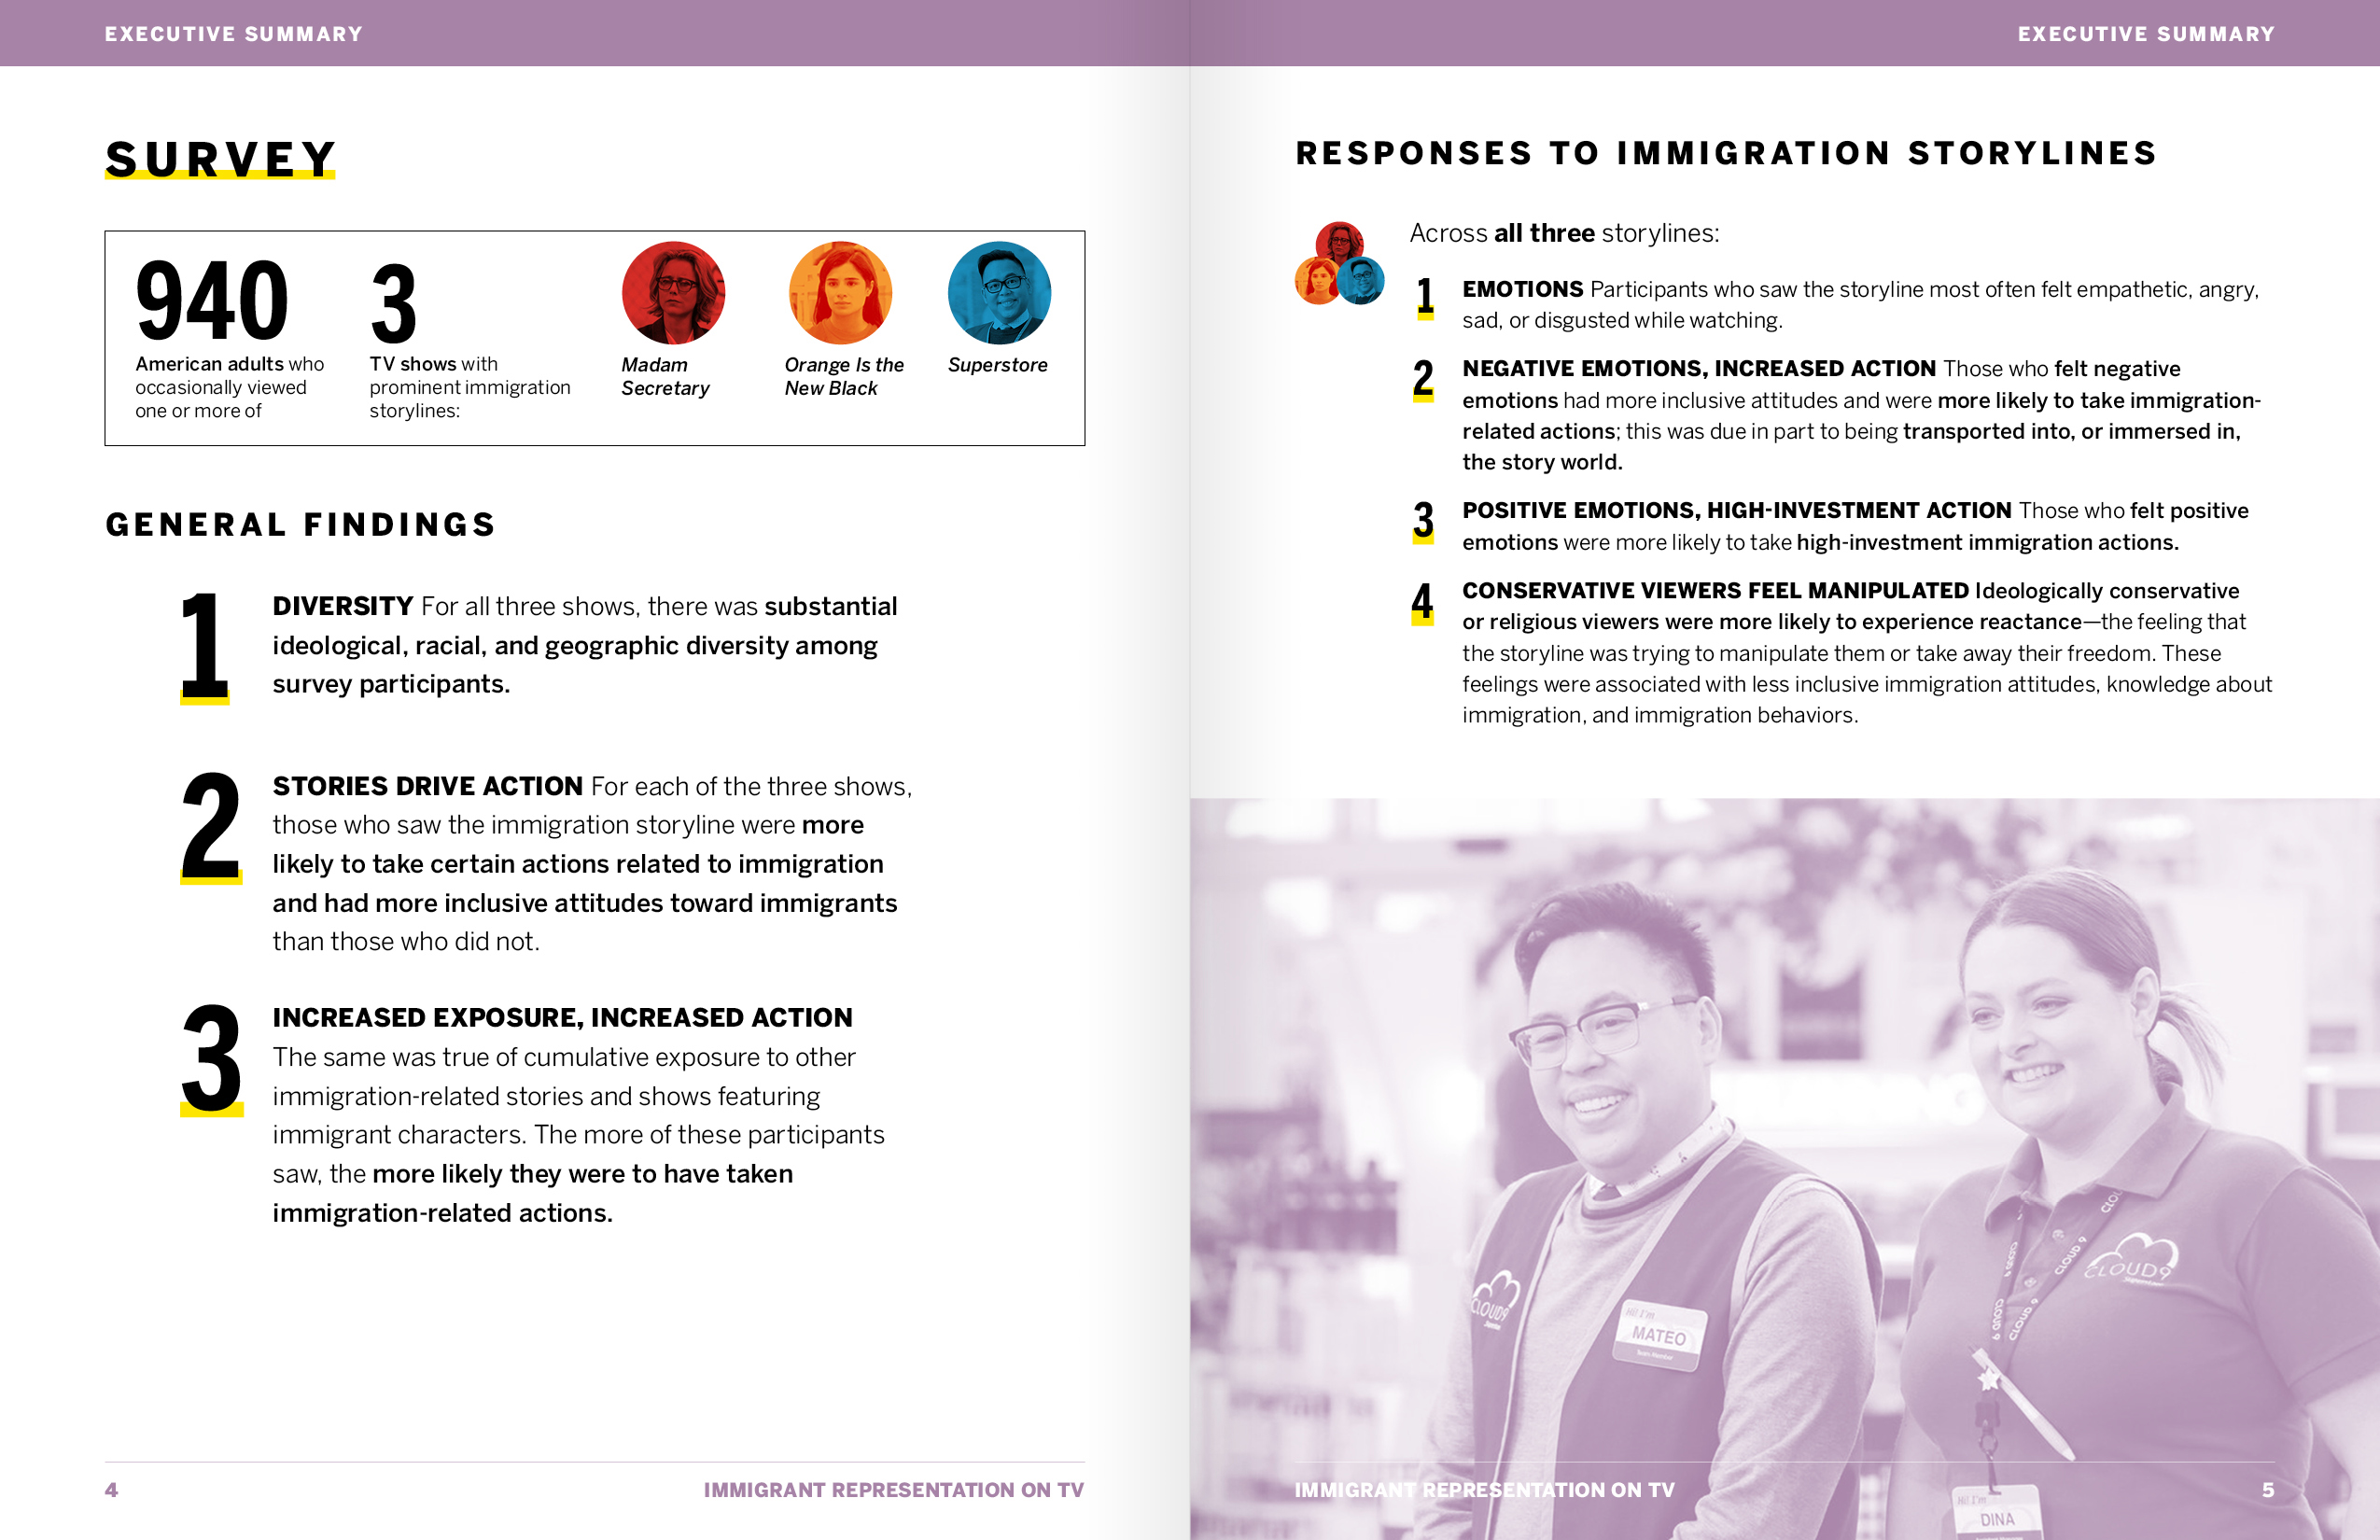 Spread from the Executive Summary on the Survey portion of the report and its general findings and responses to immigration storylines. In the bottom right are two Superstore characters, smiling.